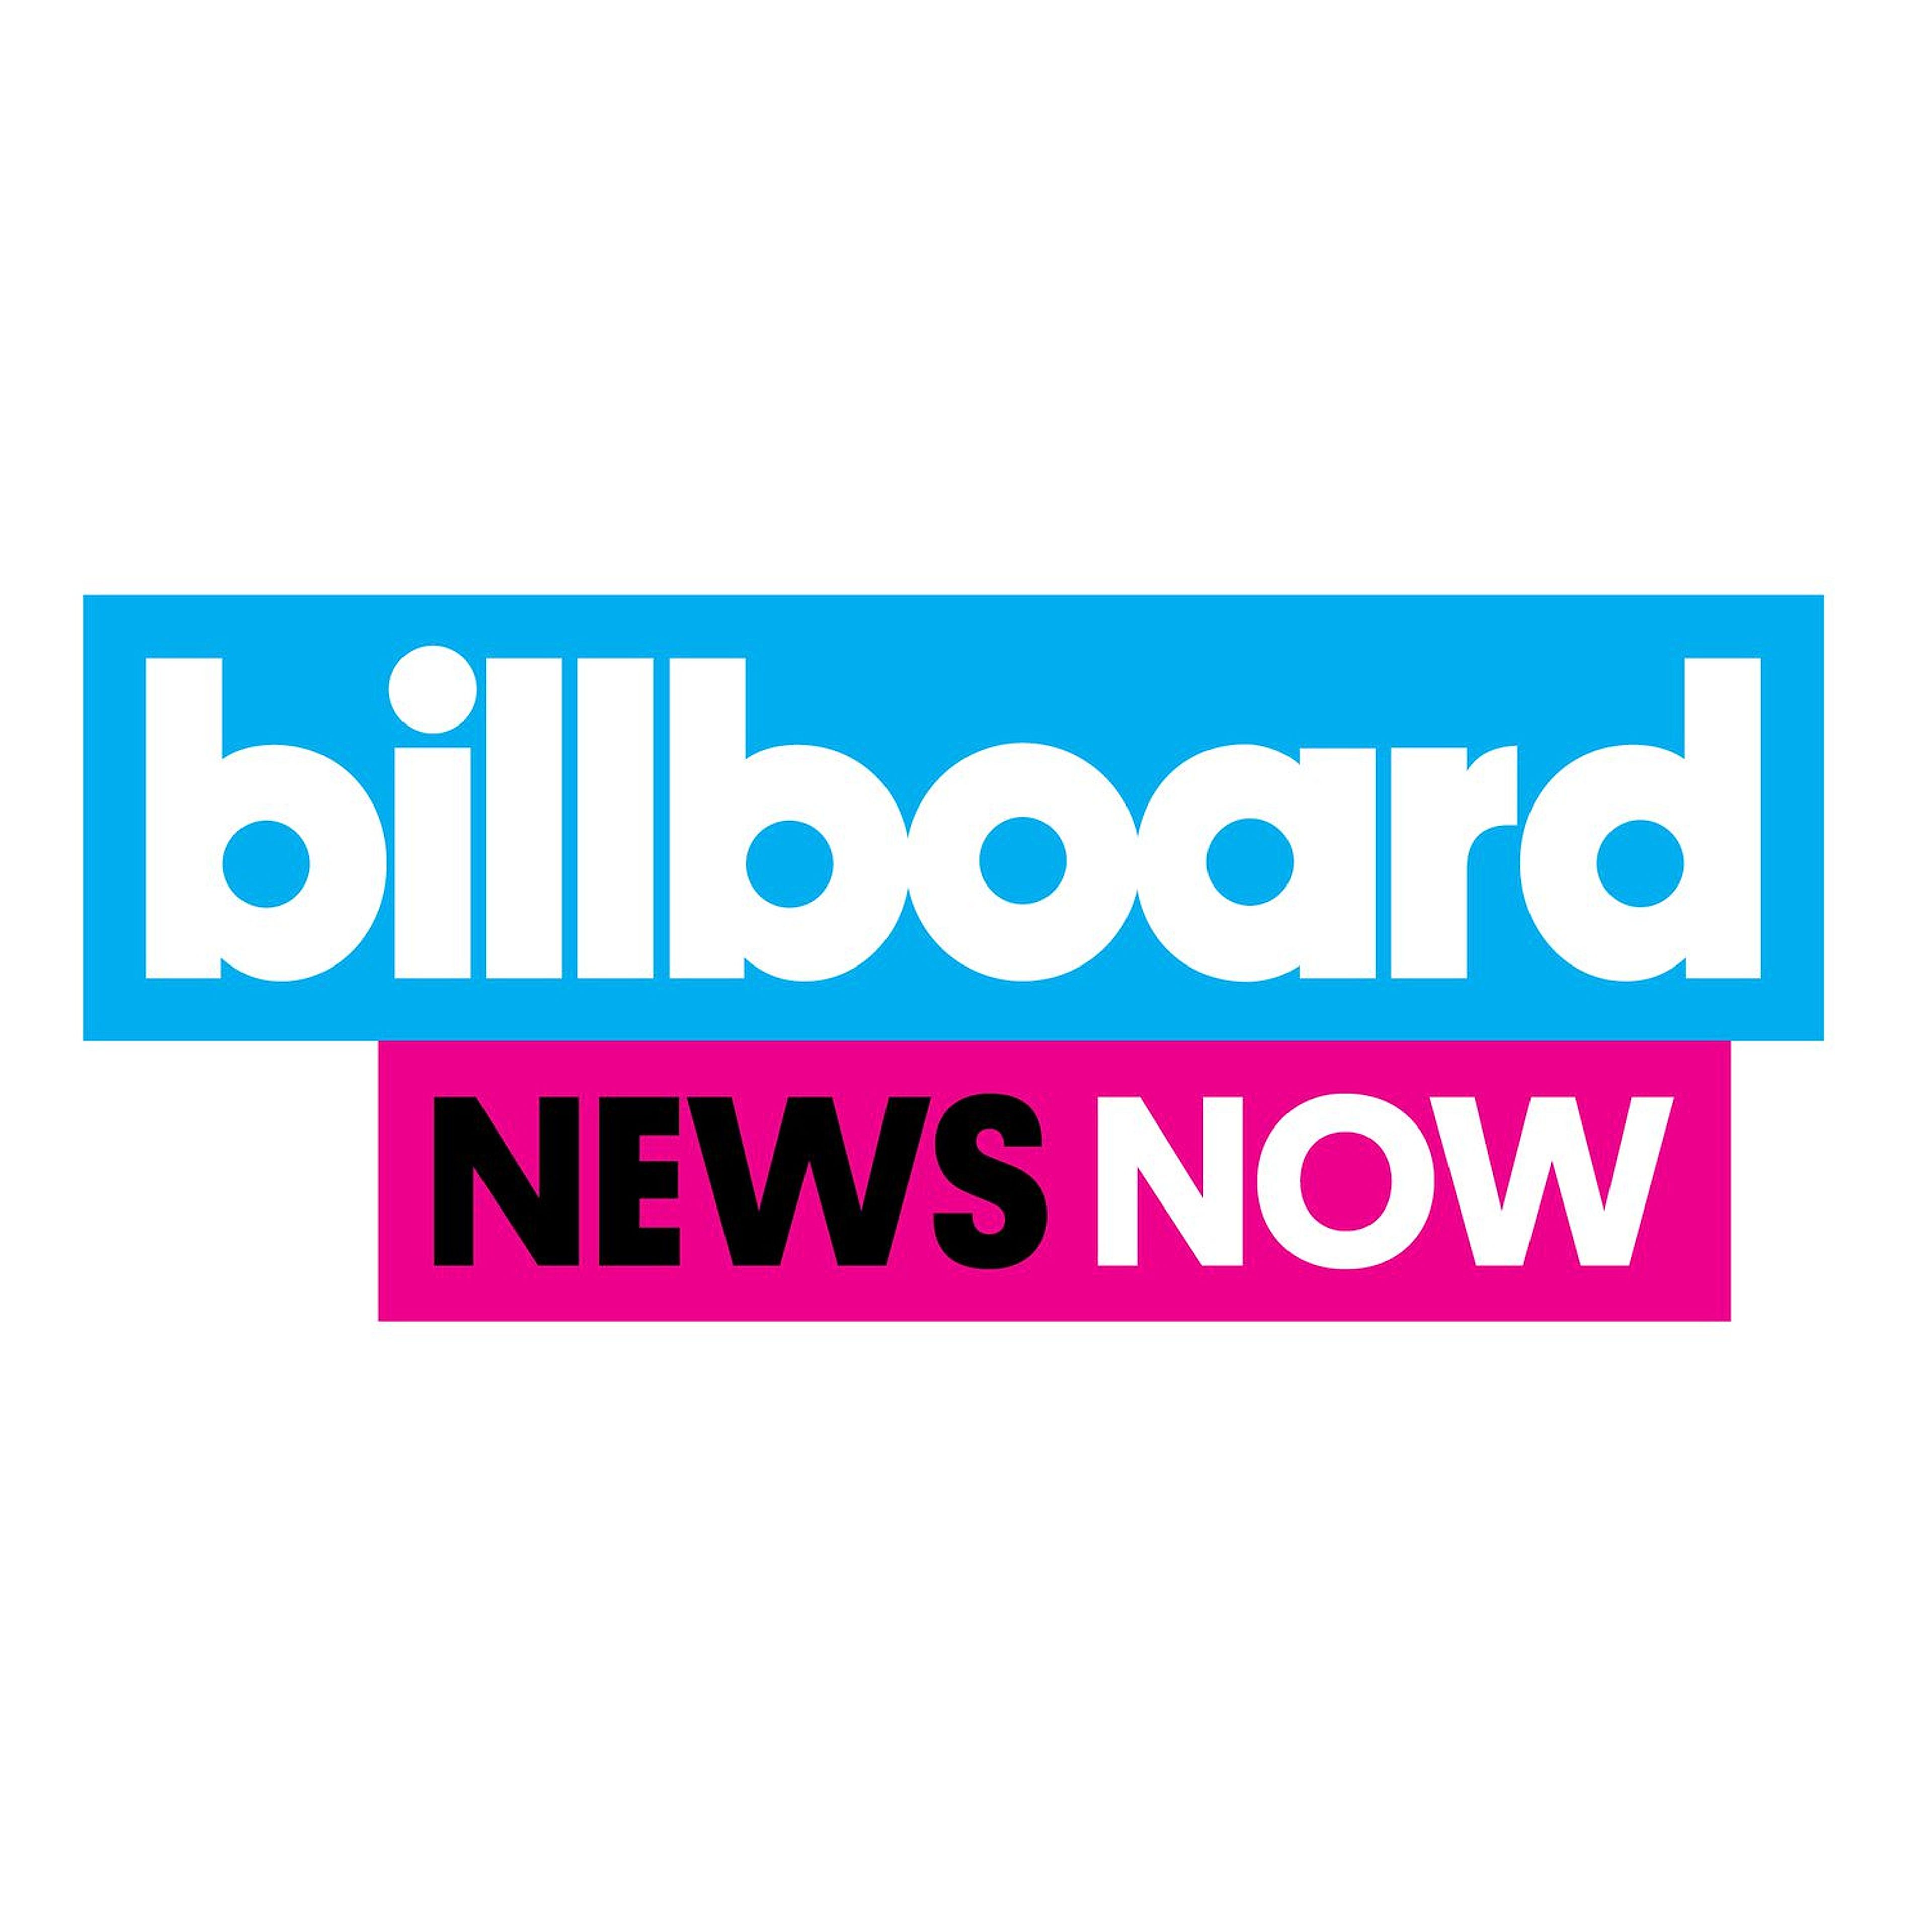 Billboard News Now cover image